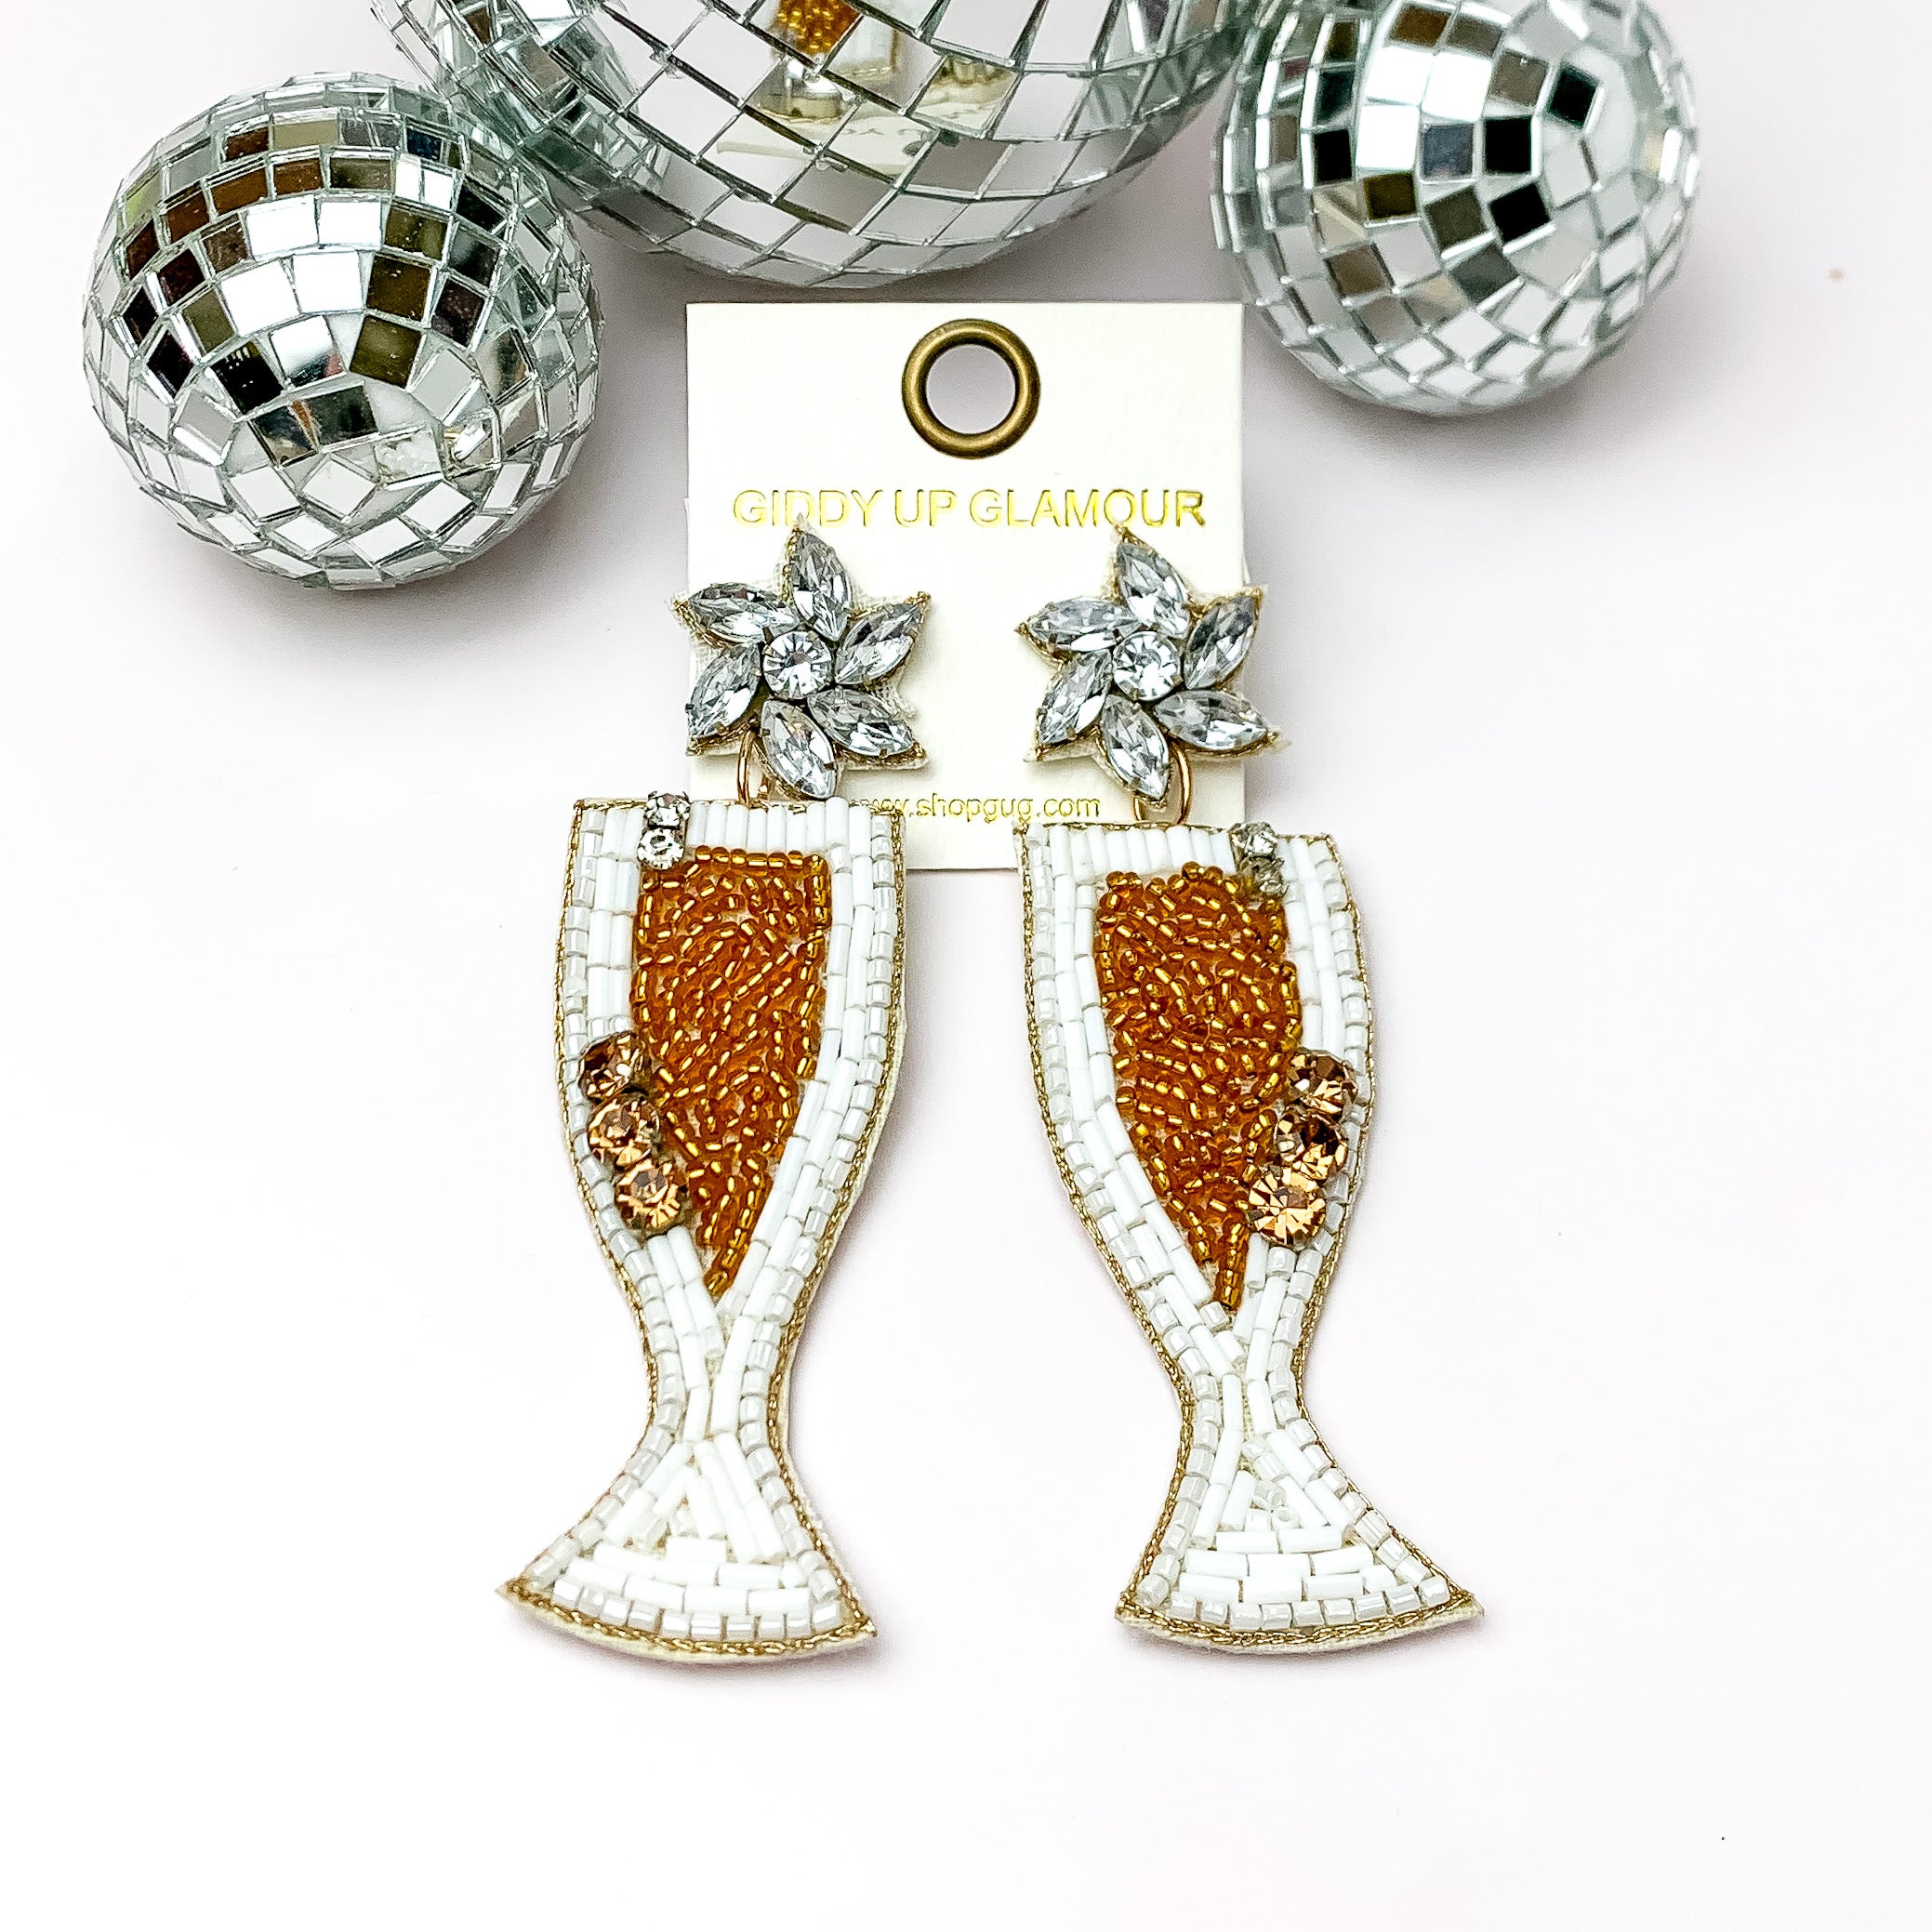 Celebration Beaded Champagne Flutes in White and Gold. Pictured on a white background with disco balls at the top.